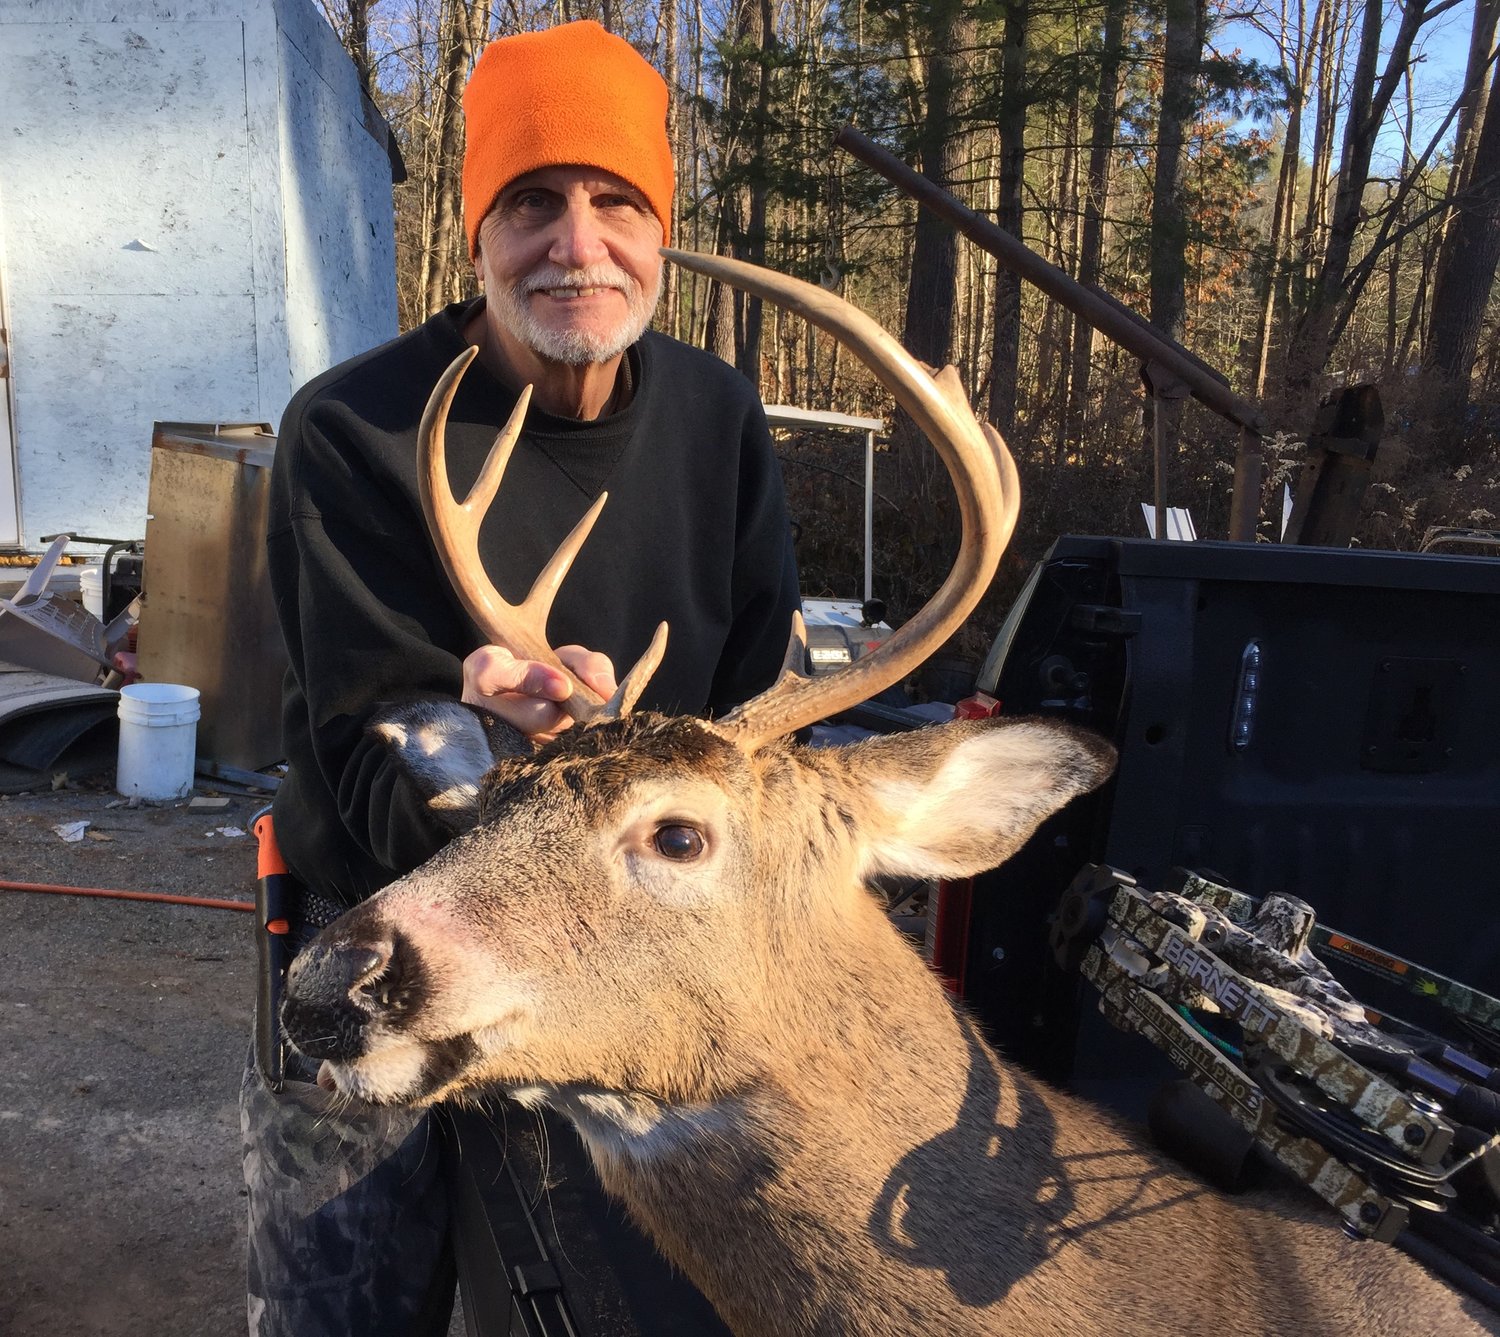 Patrick Cummins took an 8-pointer with a crossbow on November 24. The buck was harvested in Woodbourne.